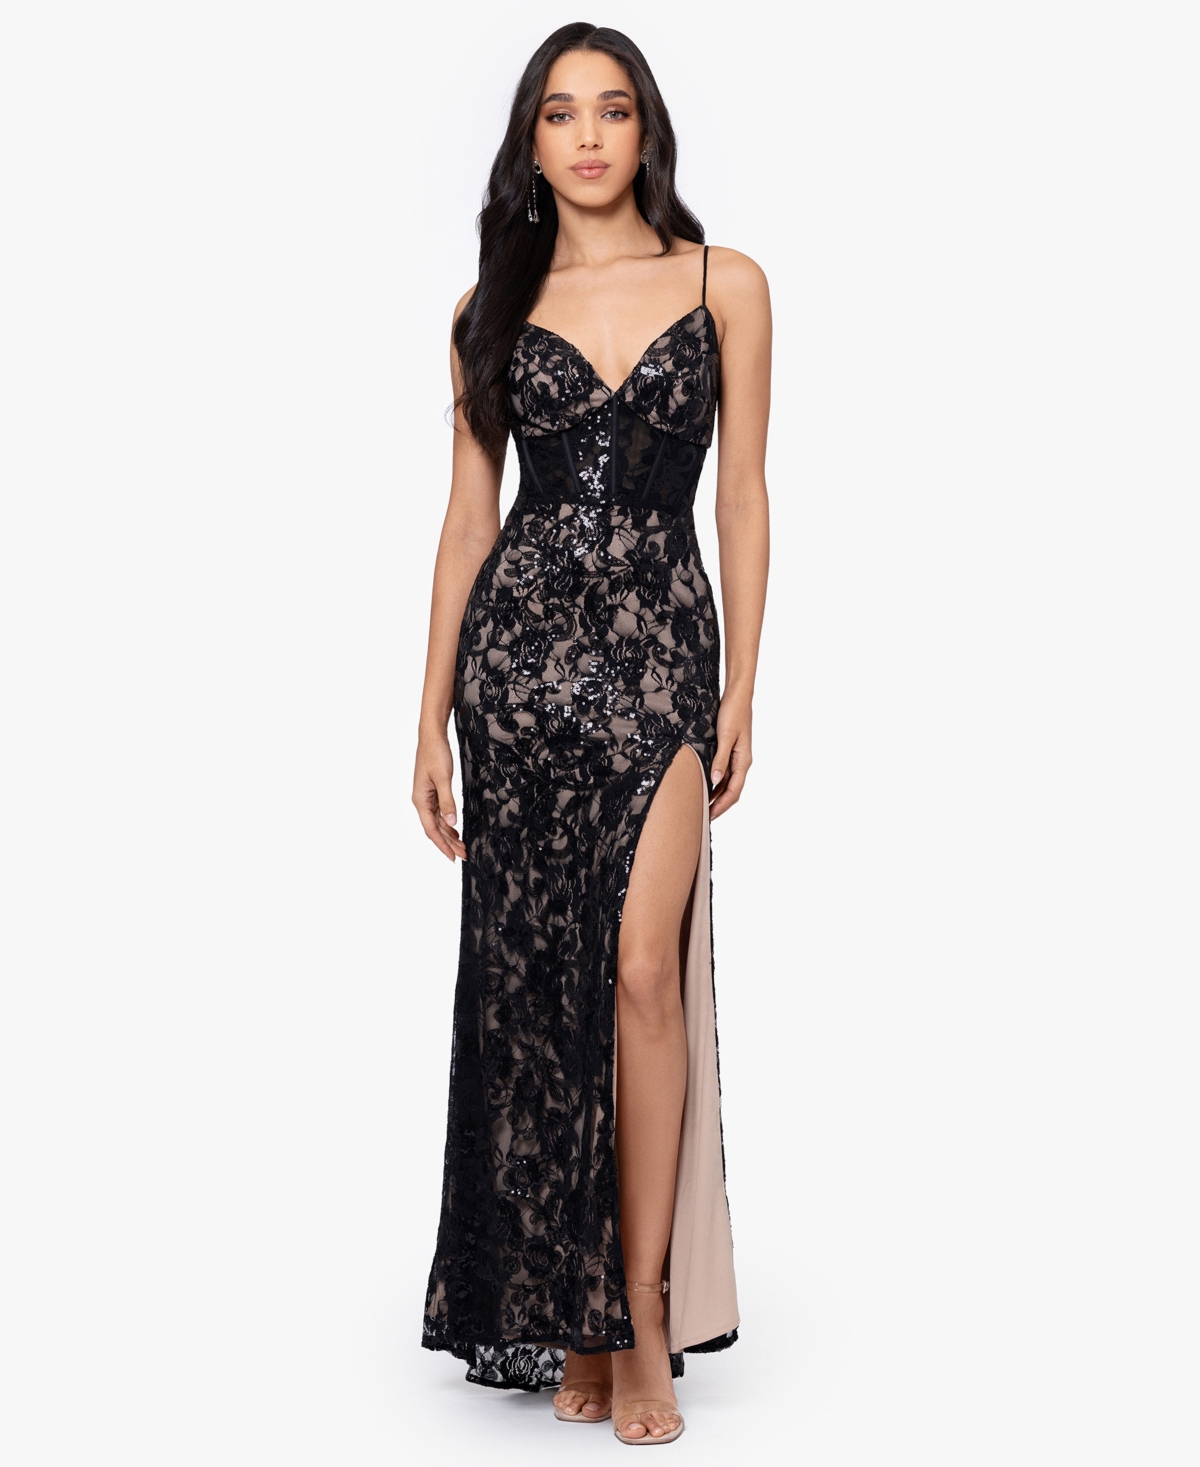 Juniors' Sequined Lace Corset Gown - Black/Nude